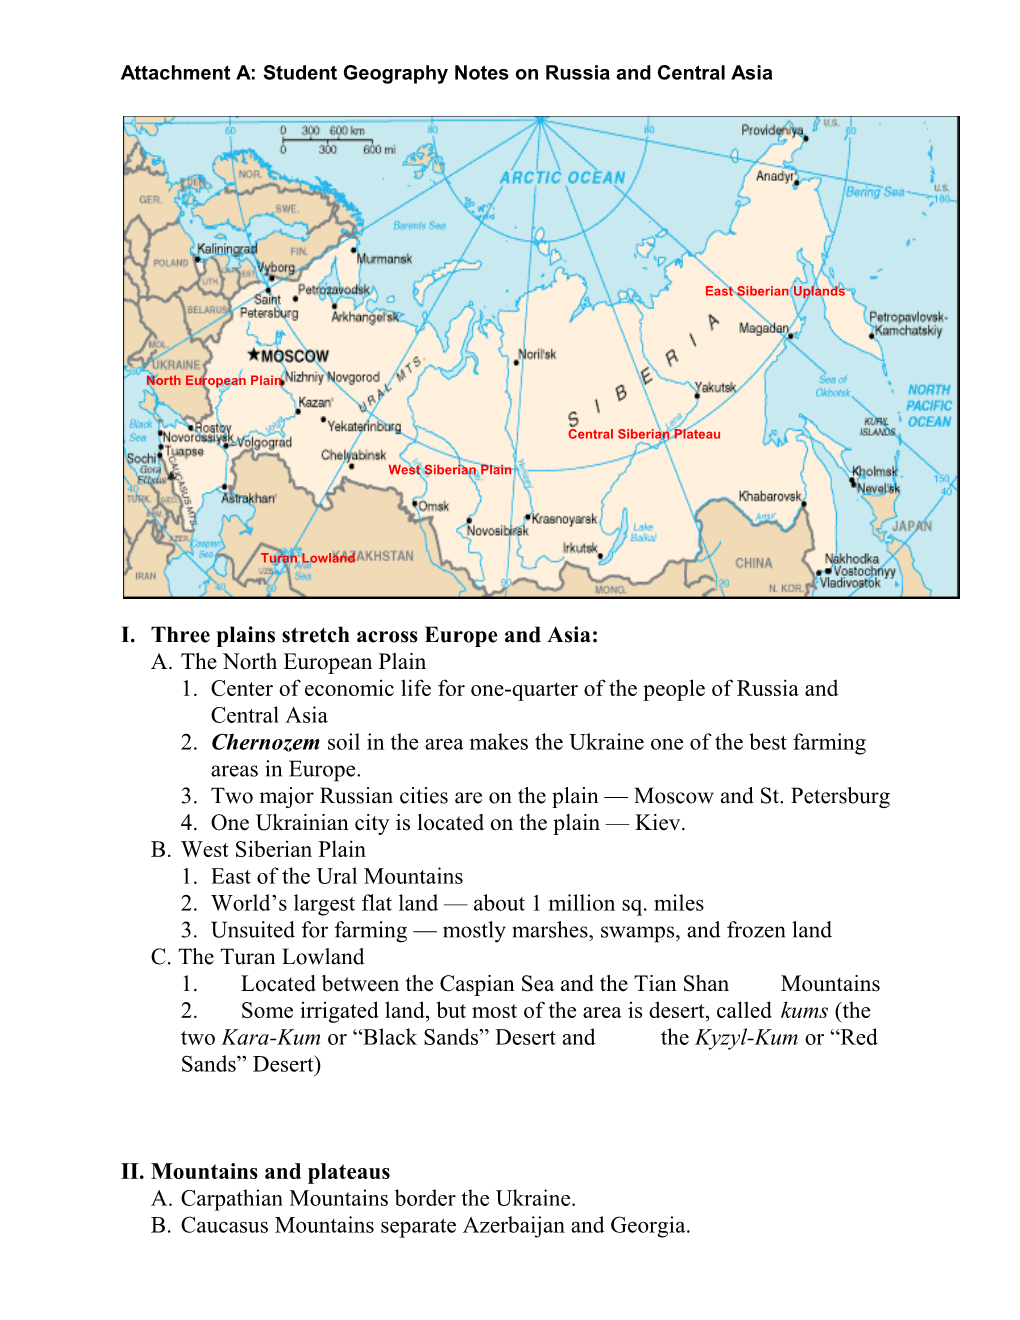 Attachment A: Student Geography Notes On Russia And Central Asia